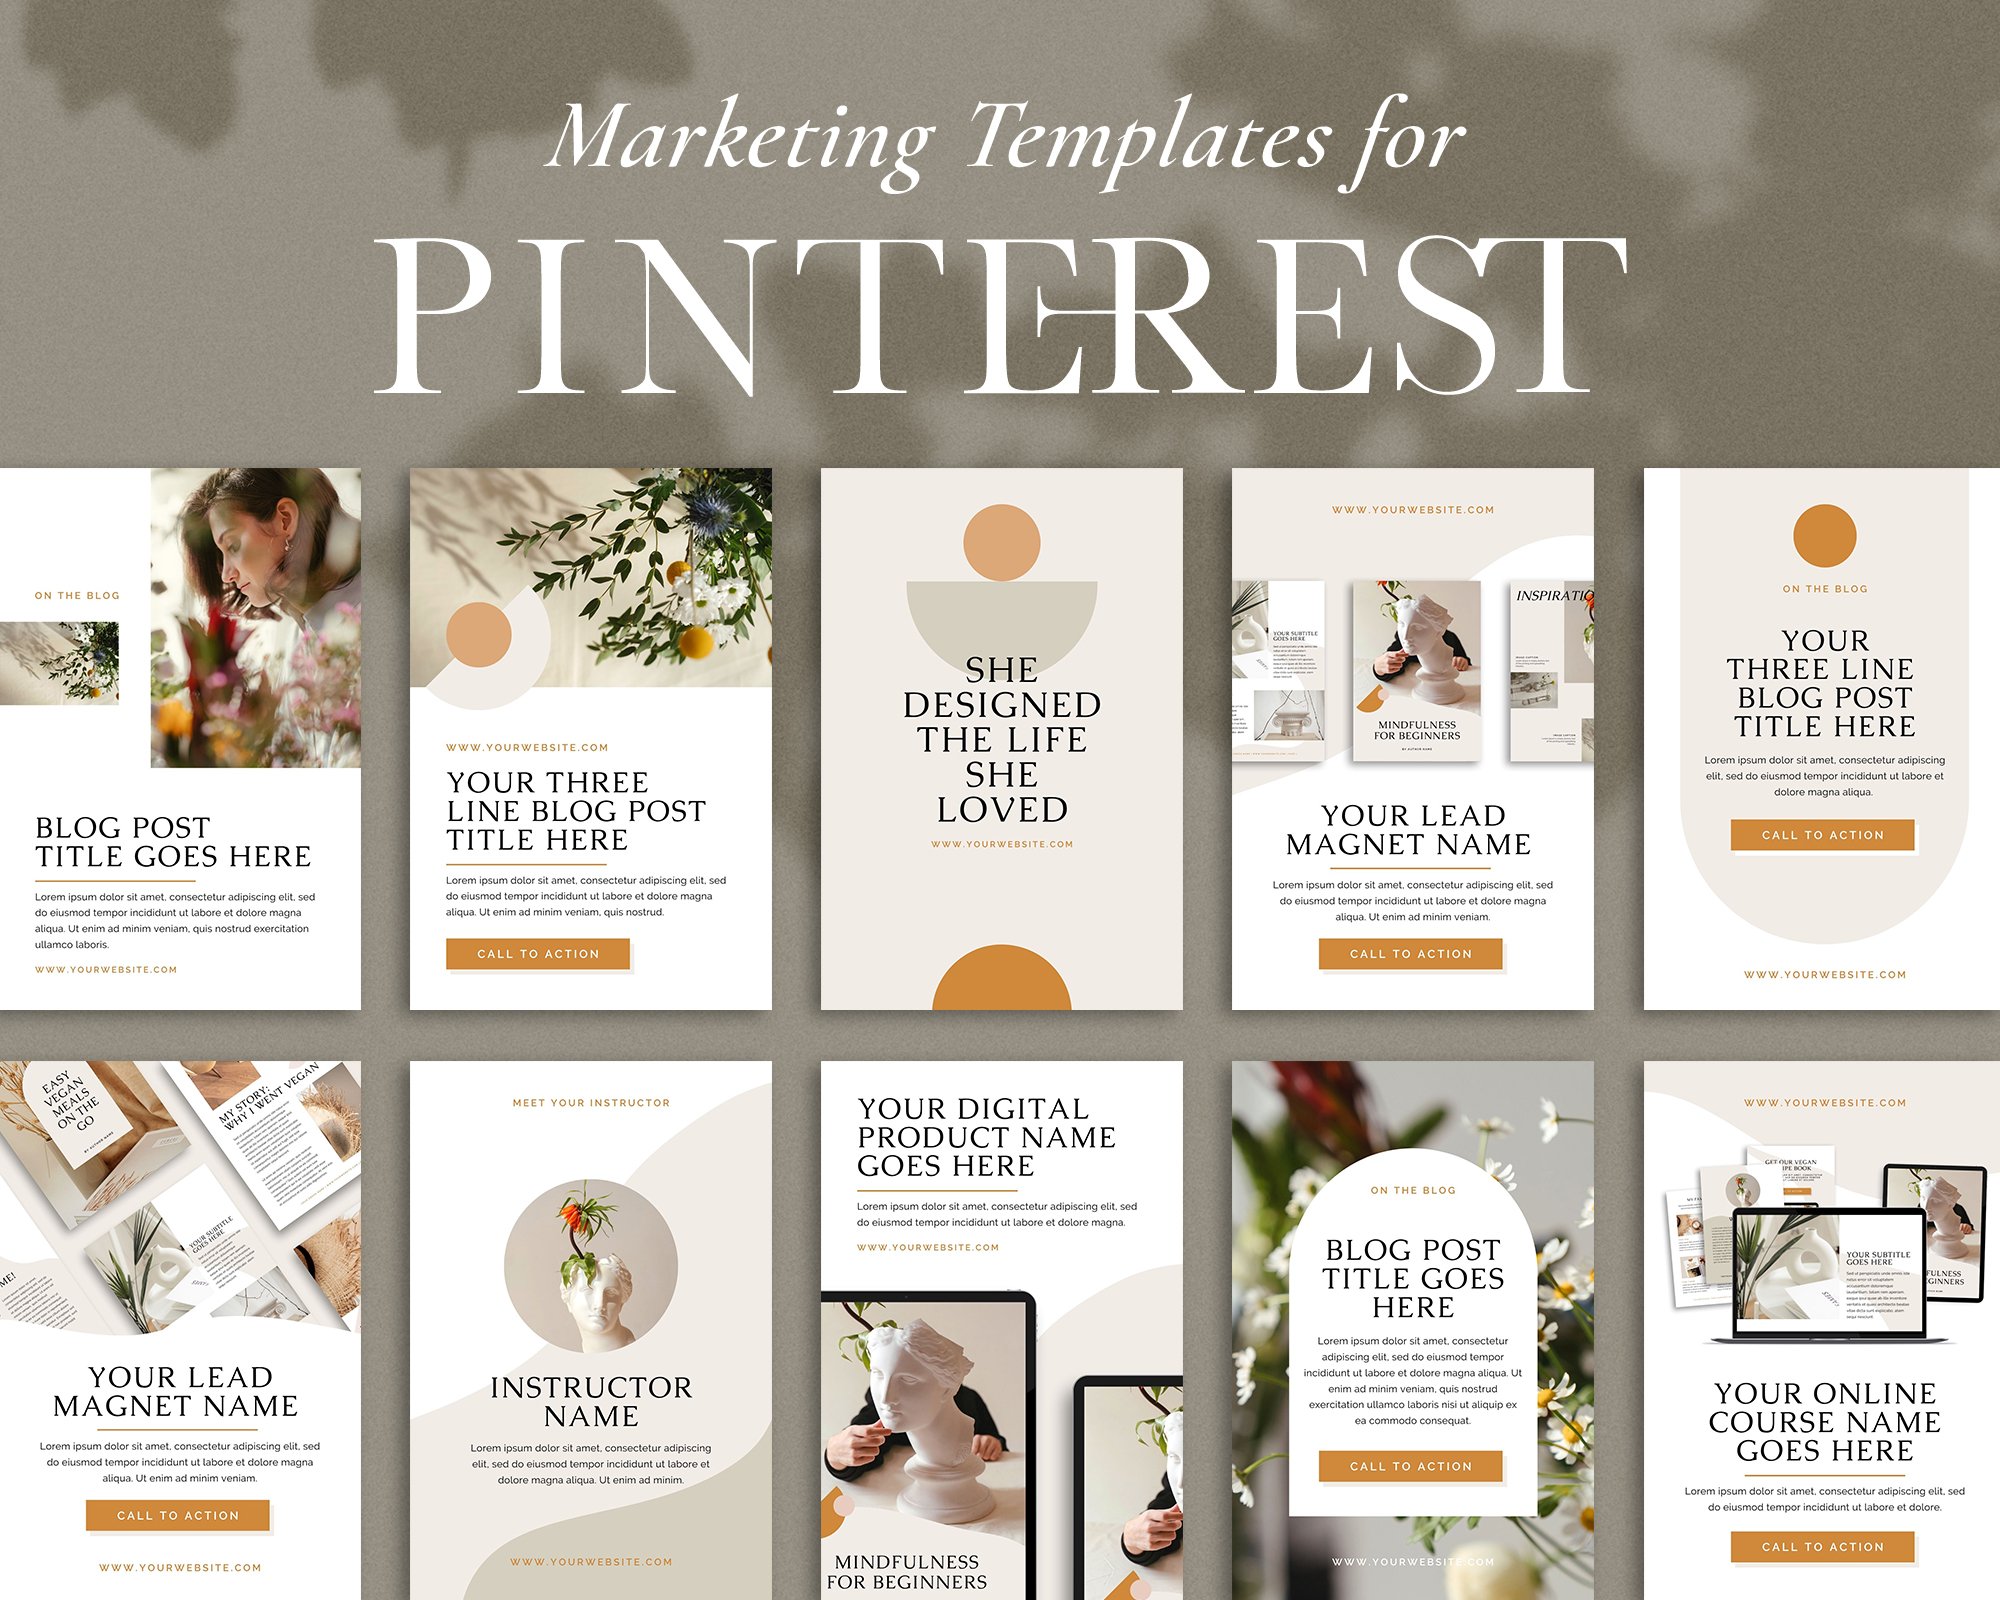 Nice Pinterest template for nice Pinterest account.